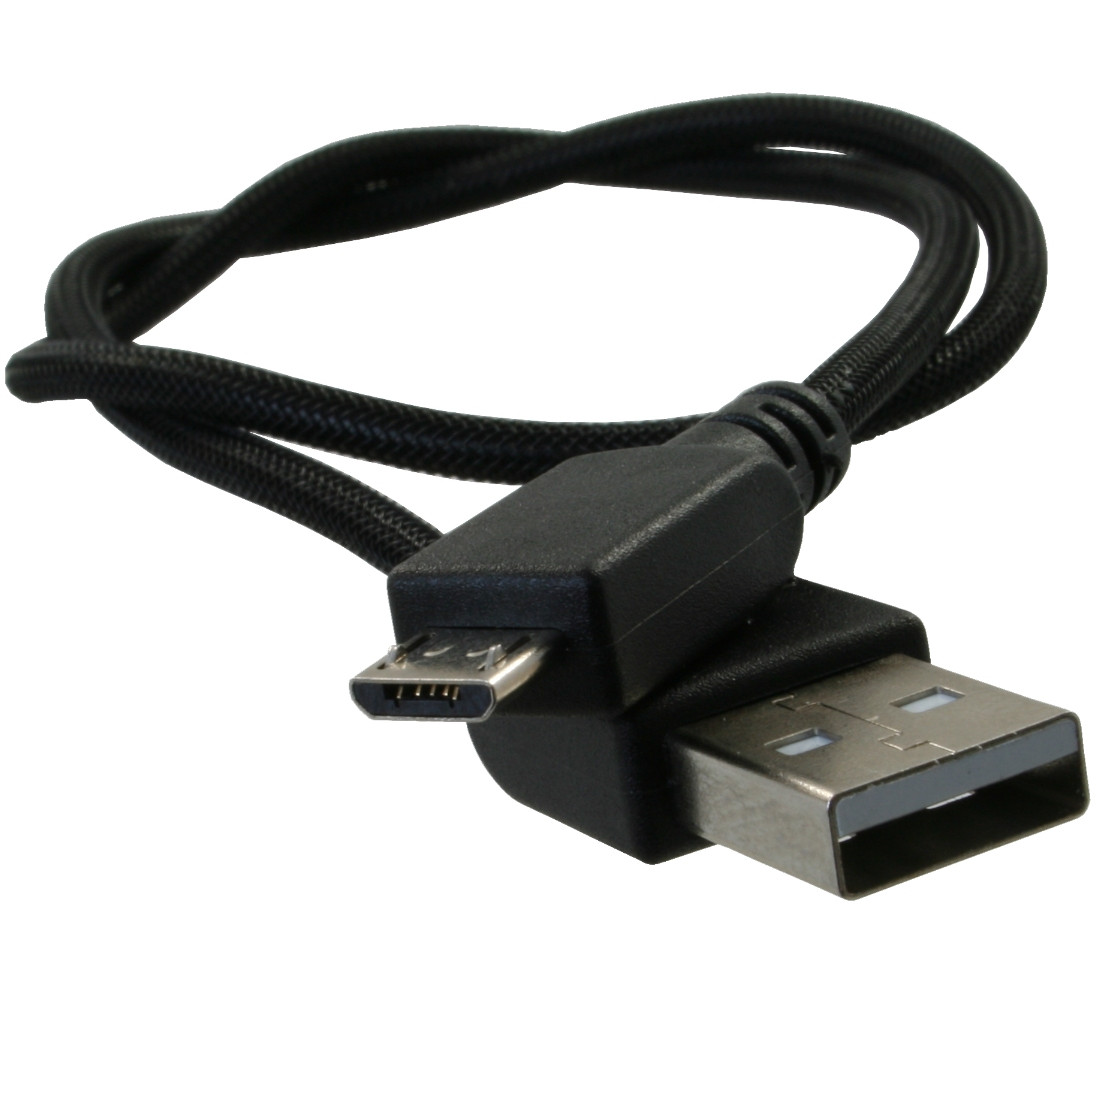 Original Micro-USB Cable for Gigaset MobileDock LM550